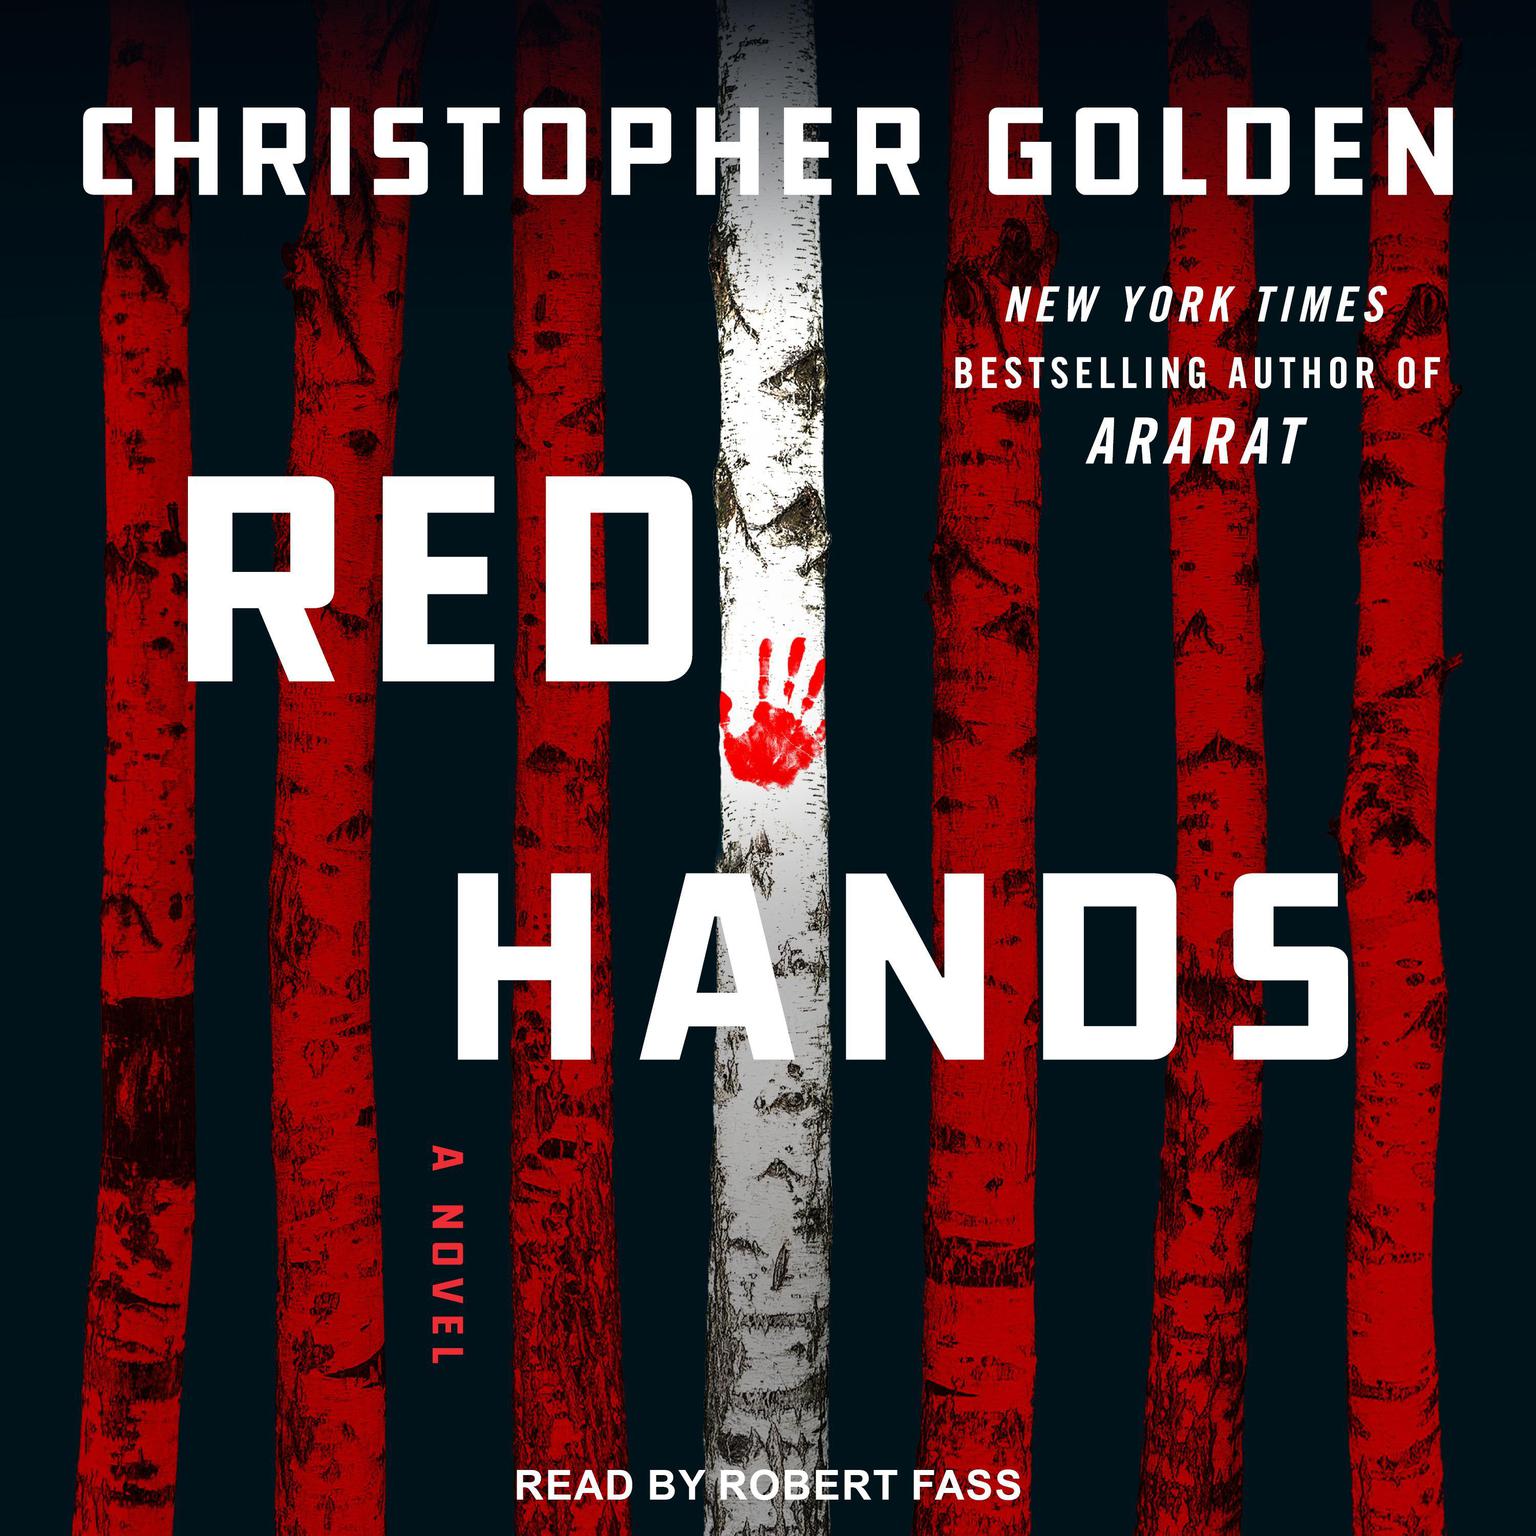 Red Hands Audiobook, by Christopher Golden